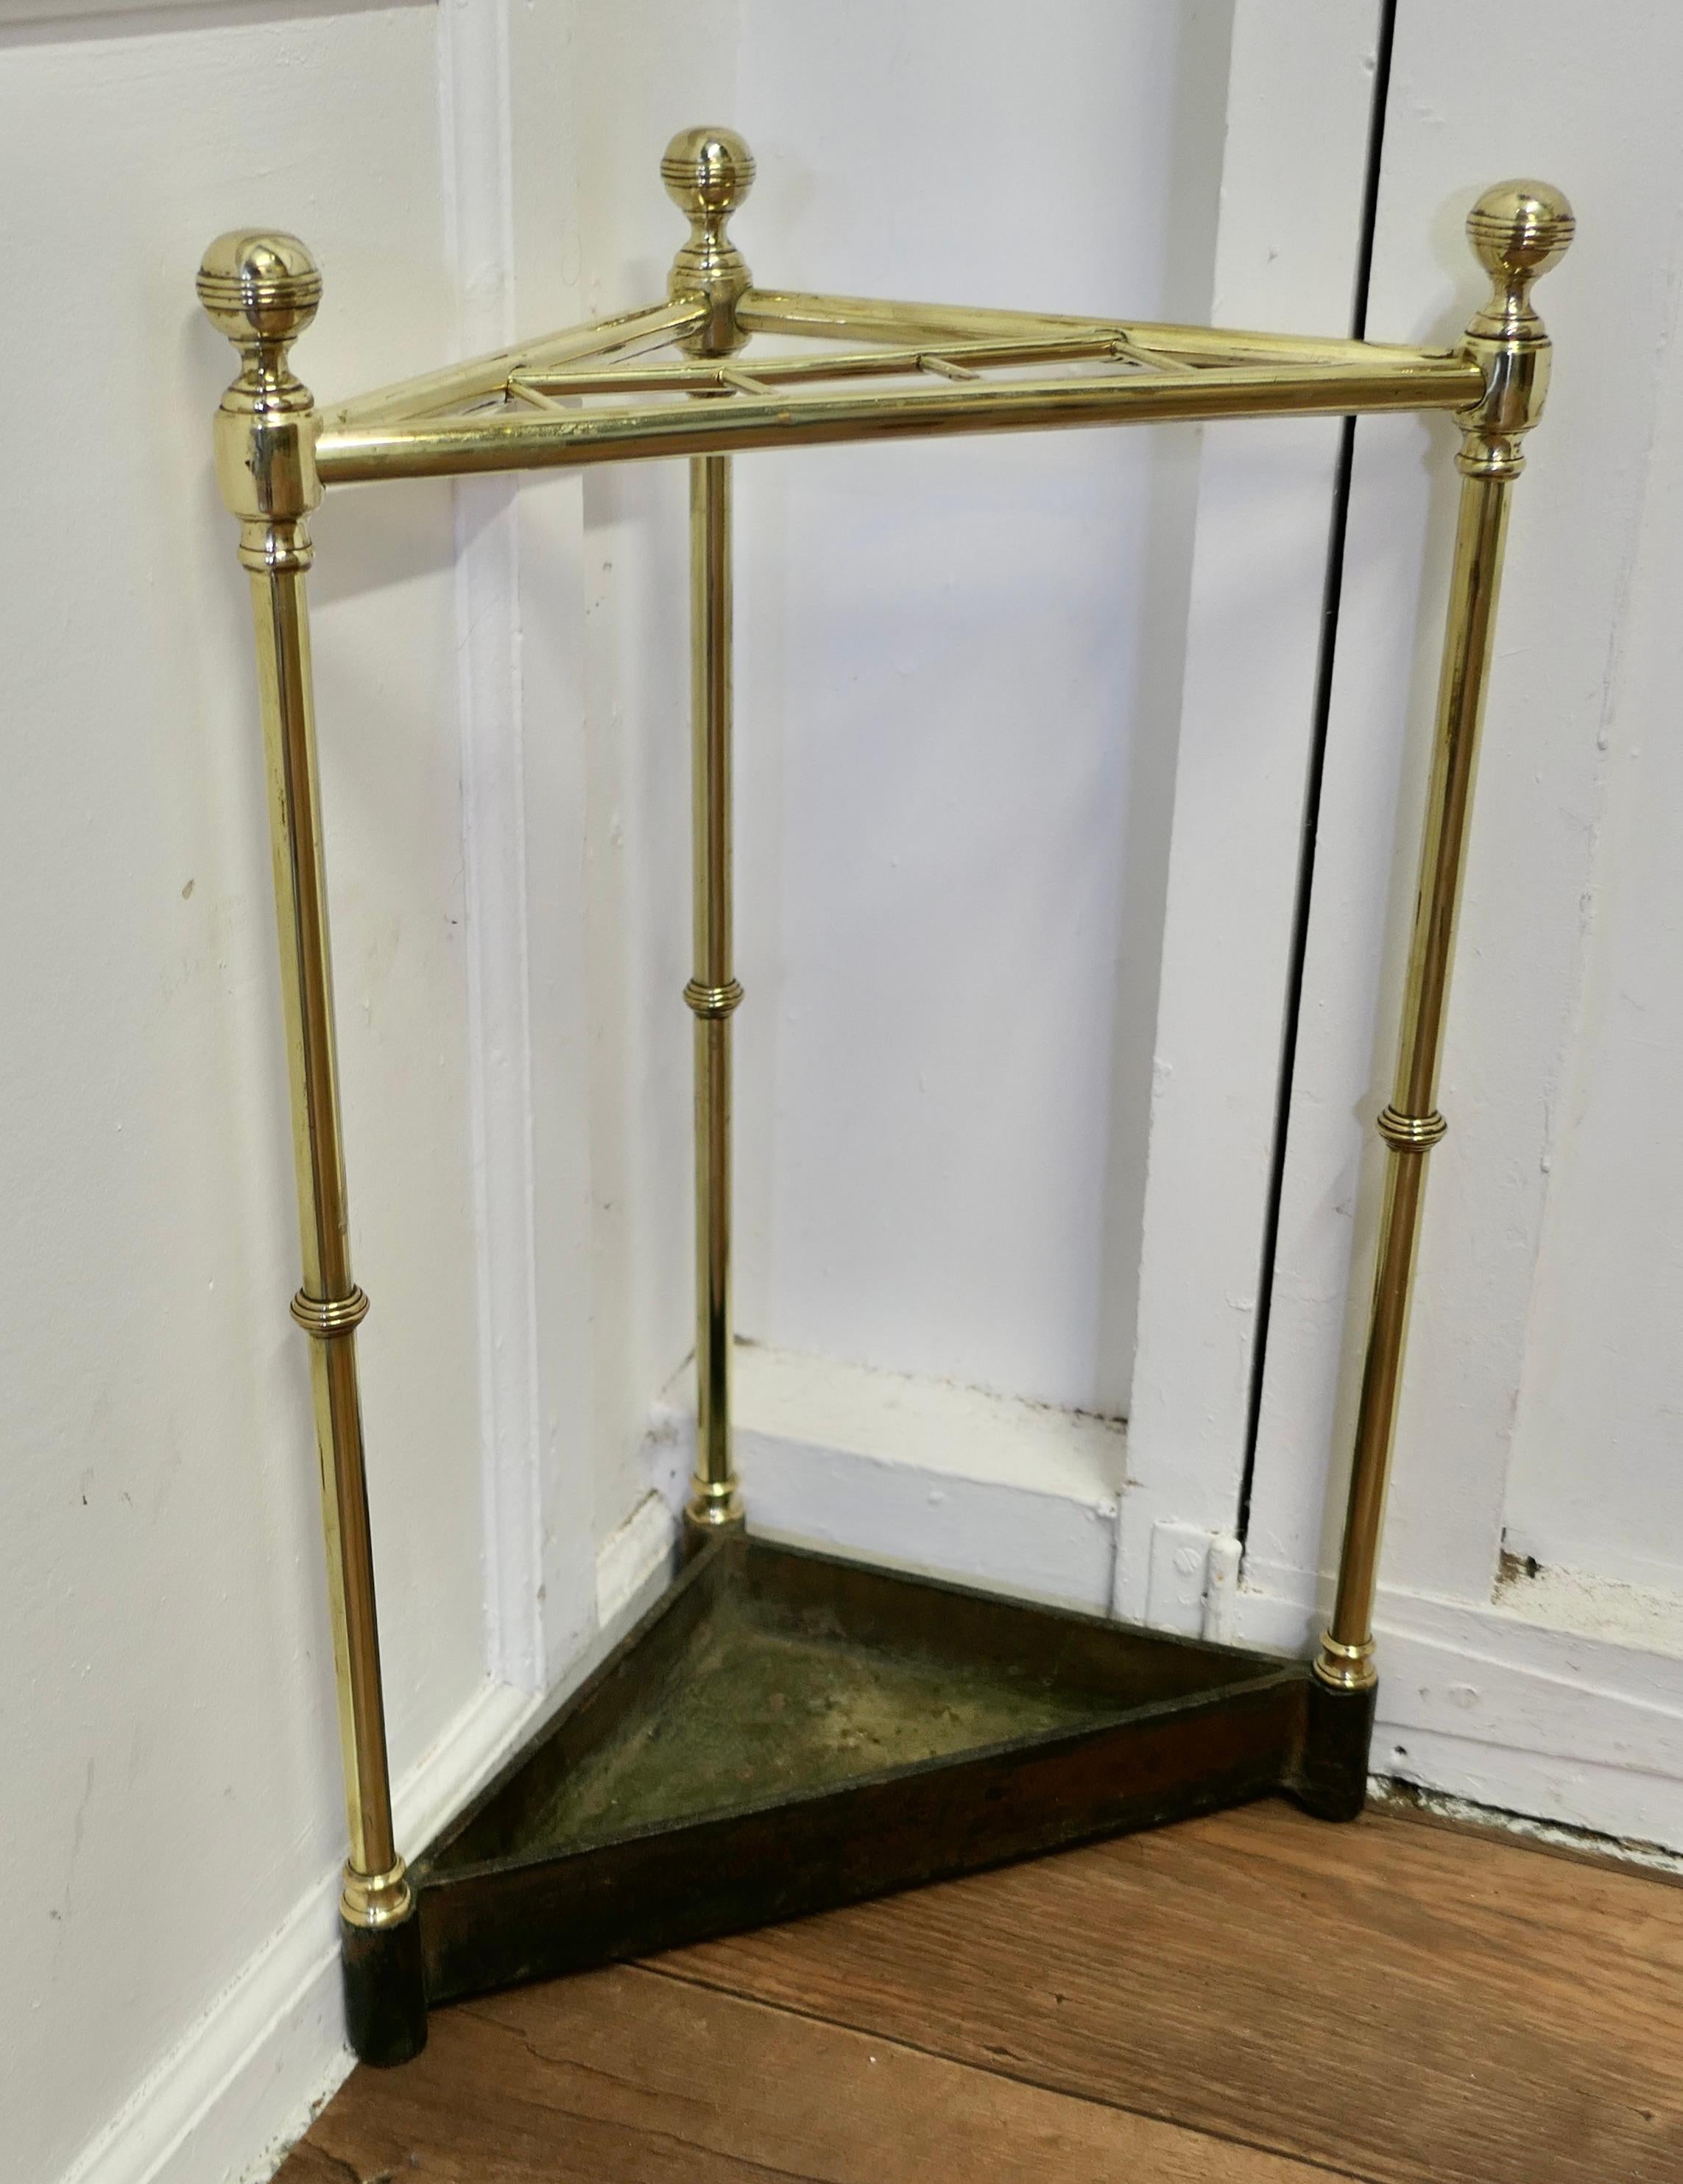 Victorian Brass and Cast Iron Corner Stick or Umbrella Stand

A charming neat little piece, the stand sits neatly in a corner, very useful where space is scarce. It has a brass rail around the top and has brass uprights topped off with stylish